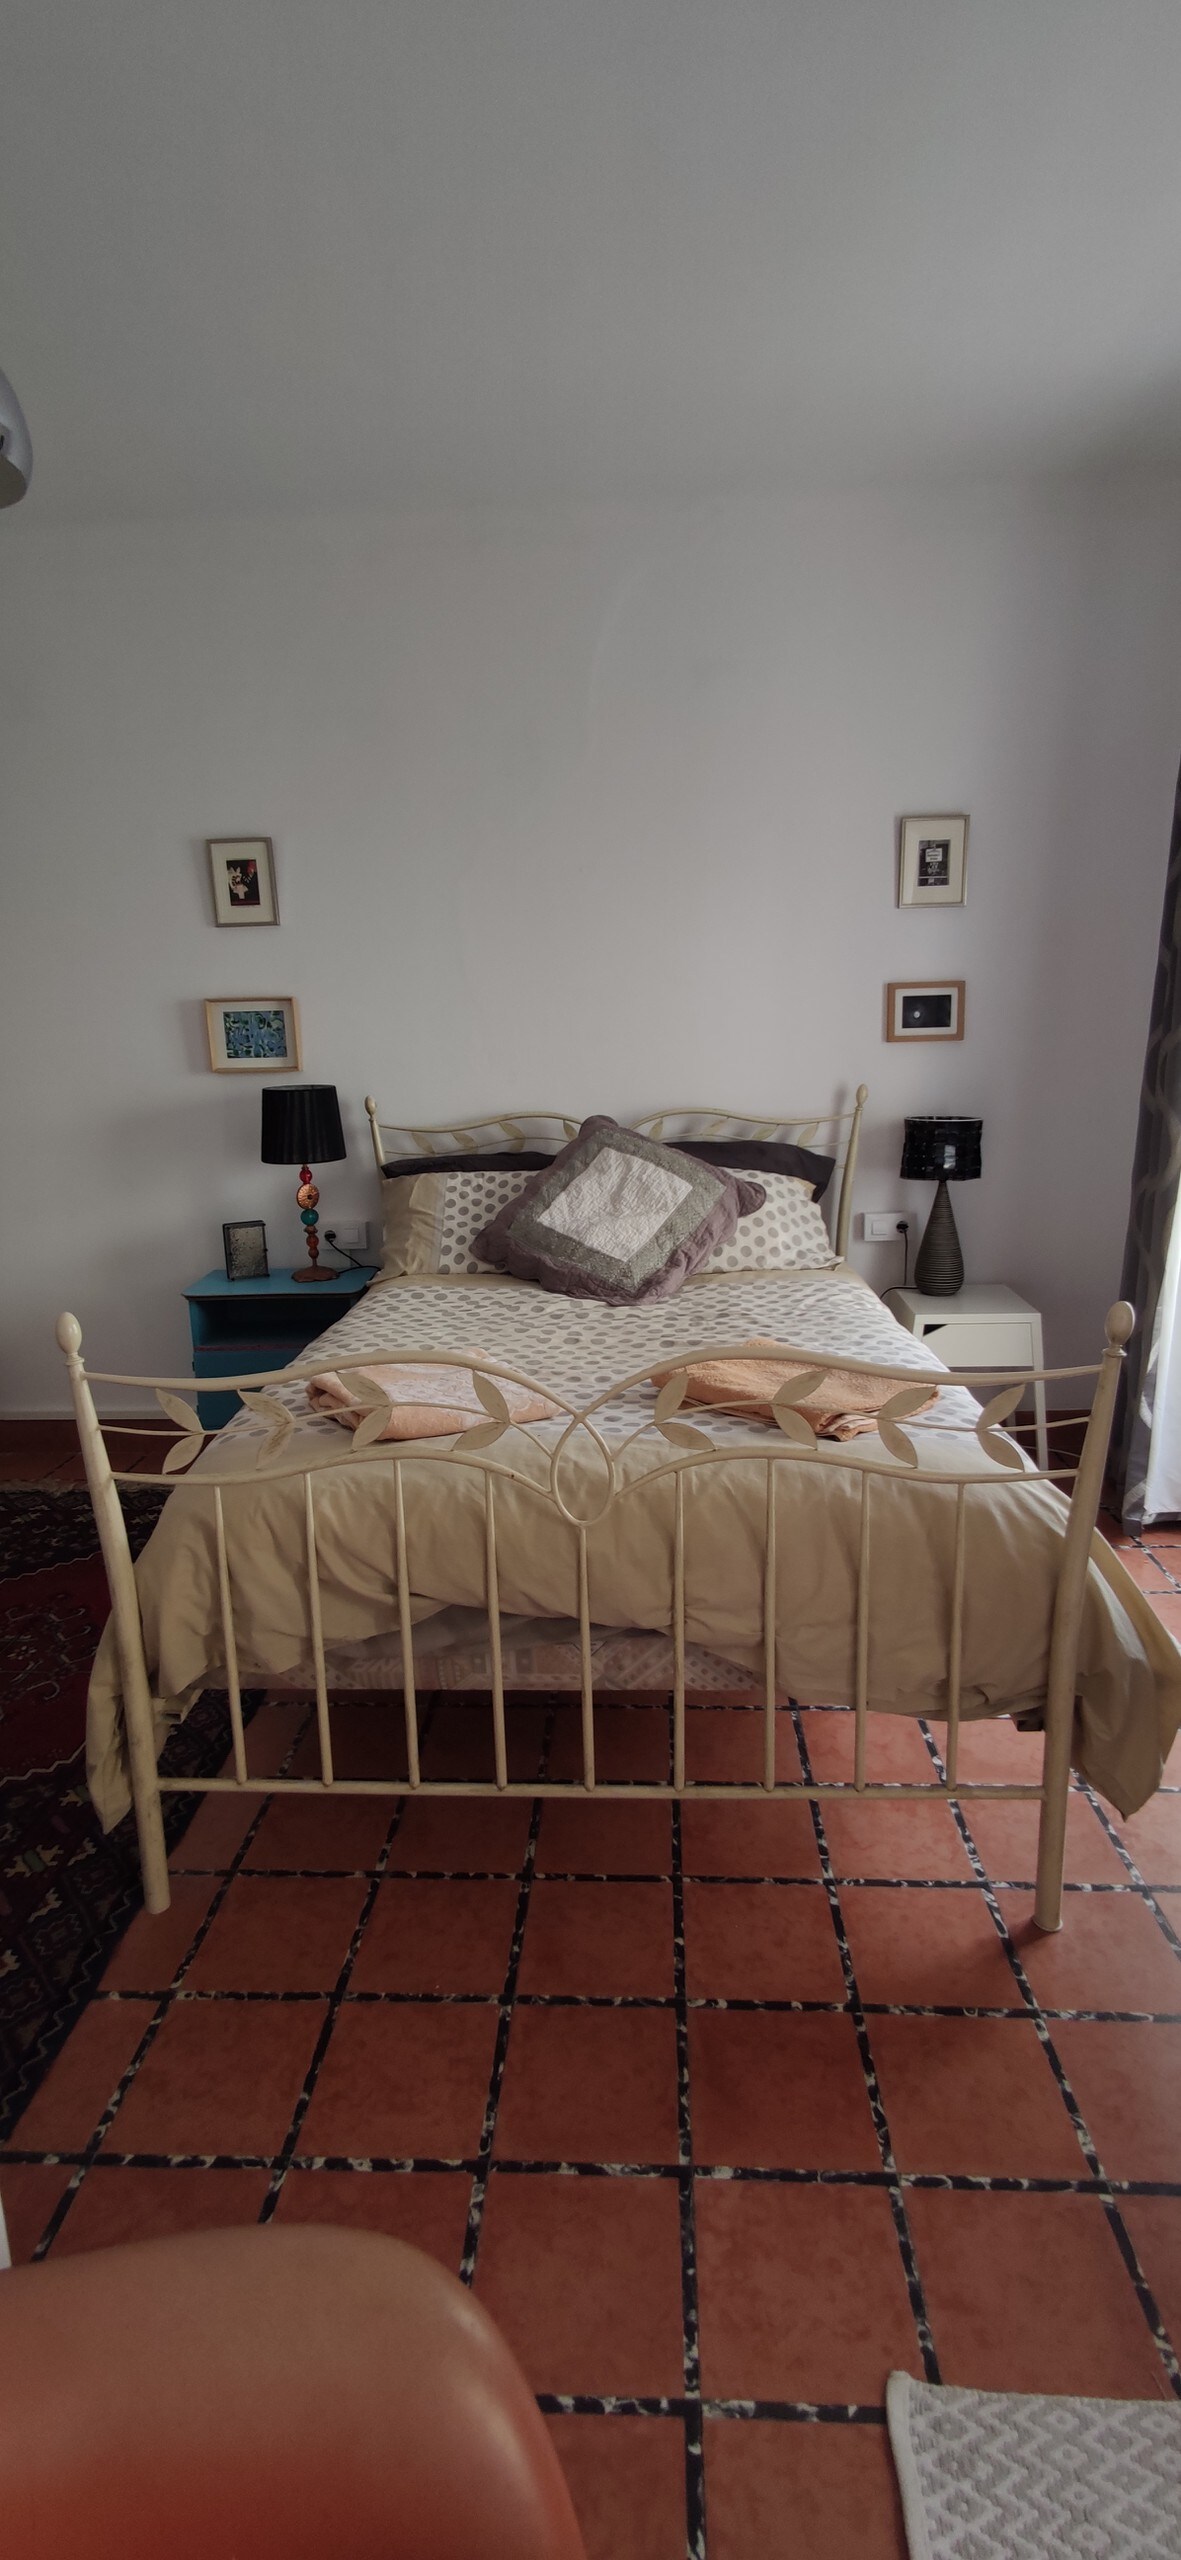 Heating, air con, comfy bedroom, central Figueres.